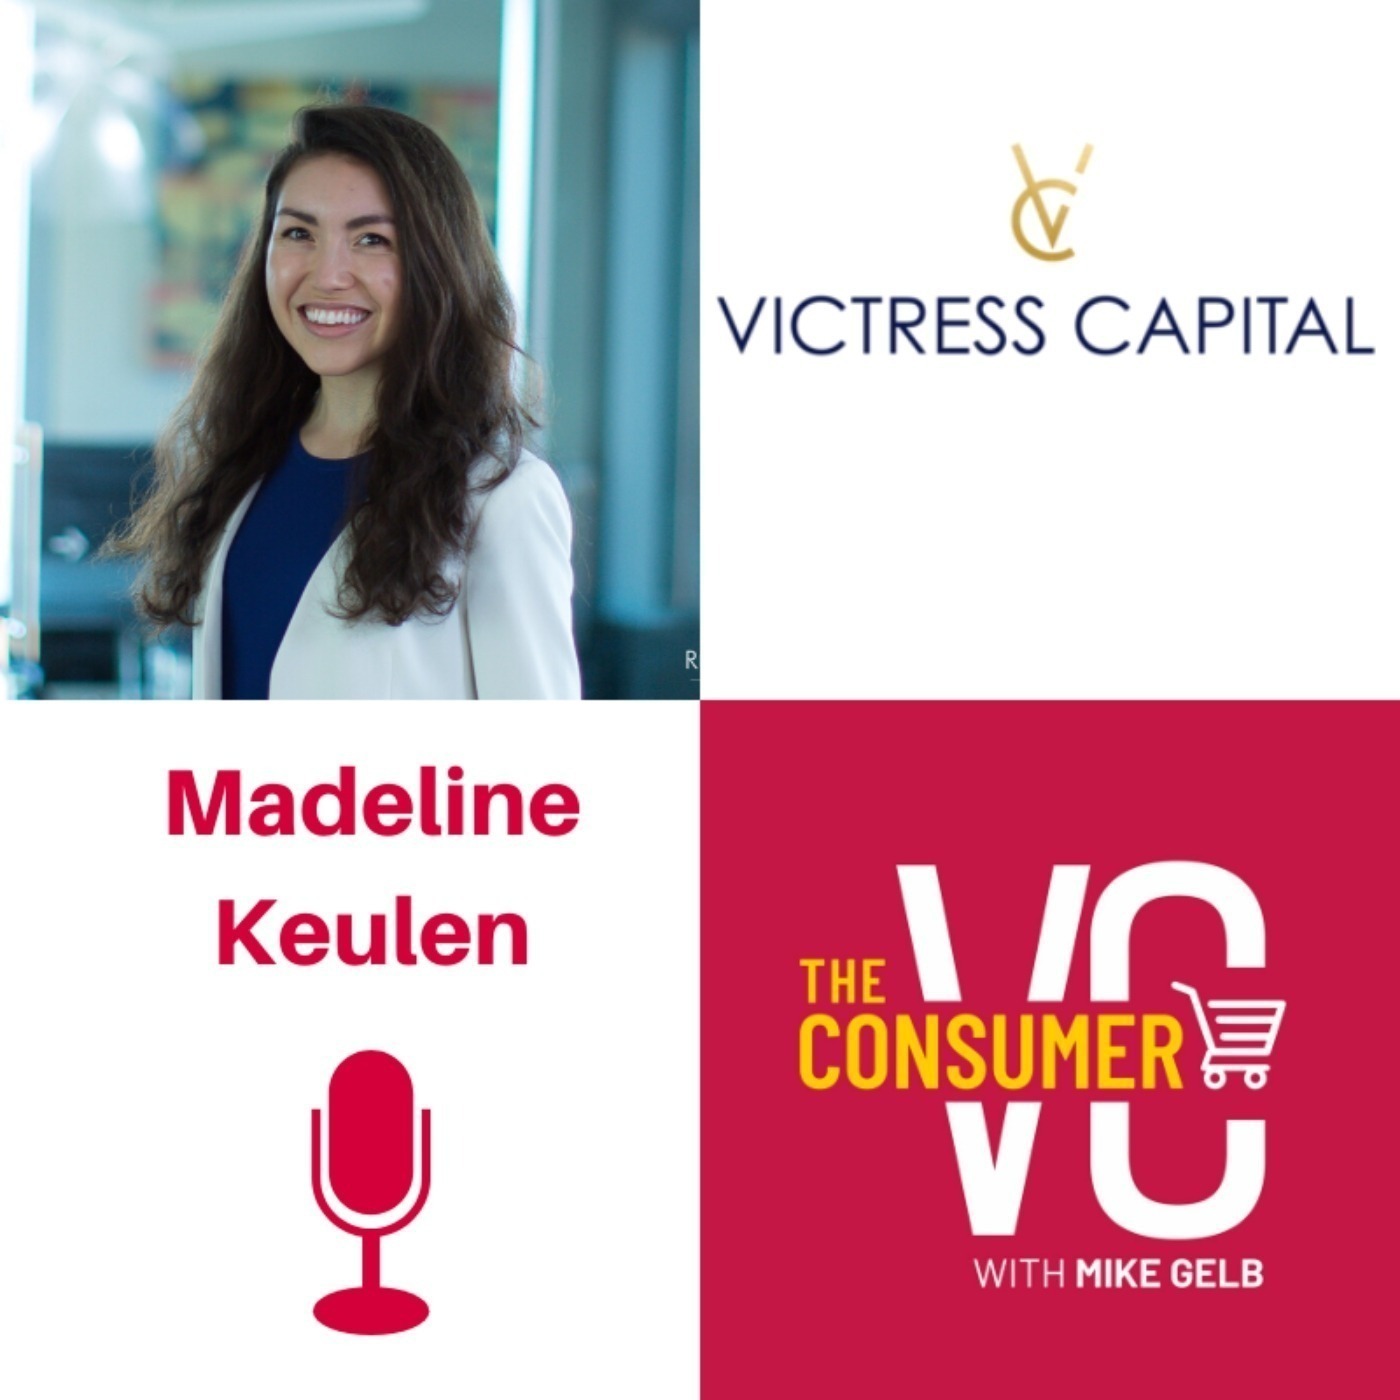 Madeline Keulen (Victress Capital) - Knowing Your Why, Analyzing Contrasting Trends, and Building Brands